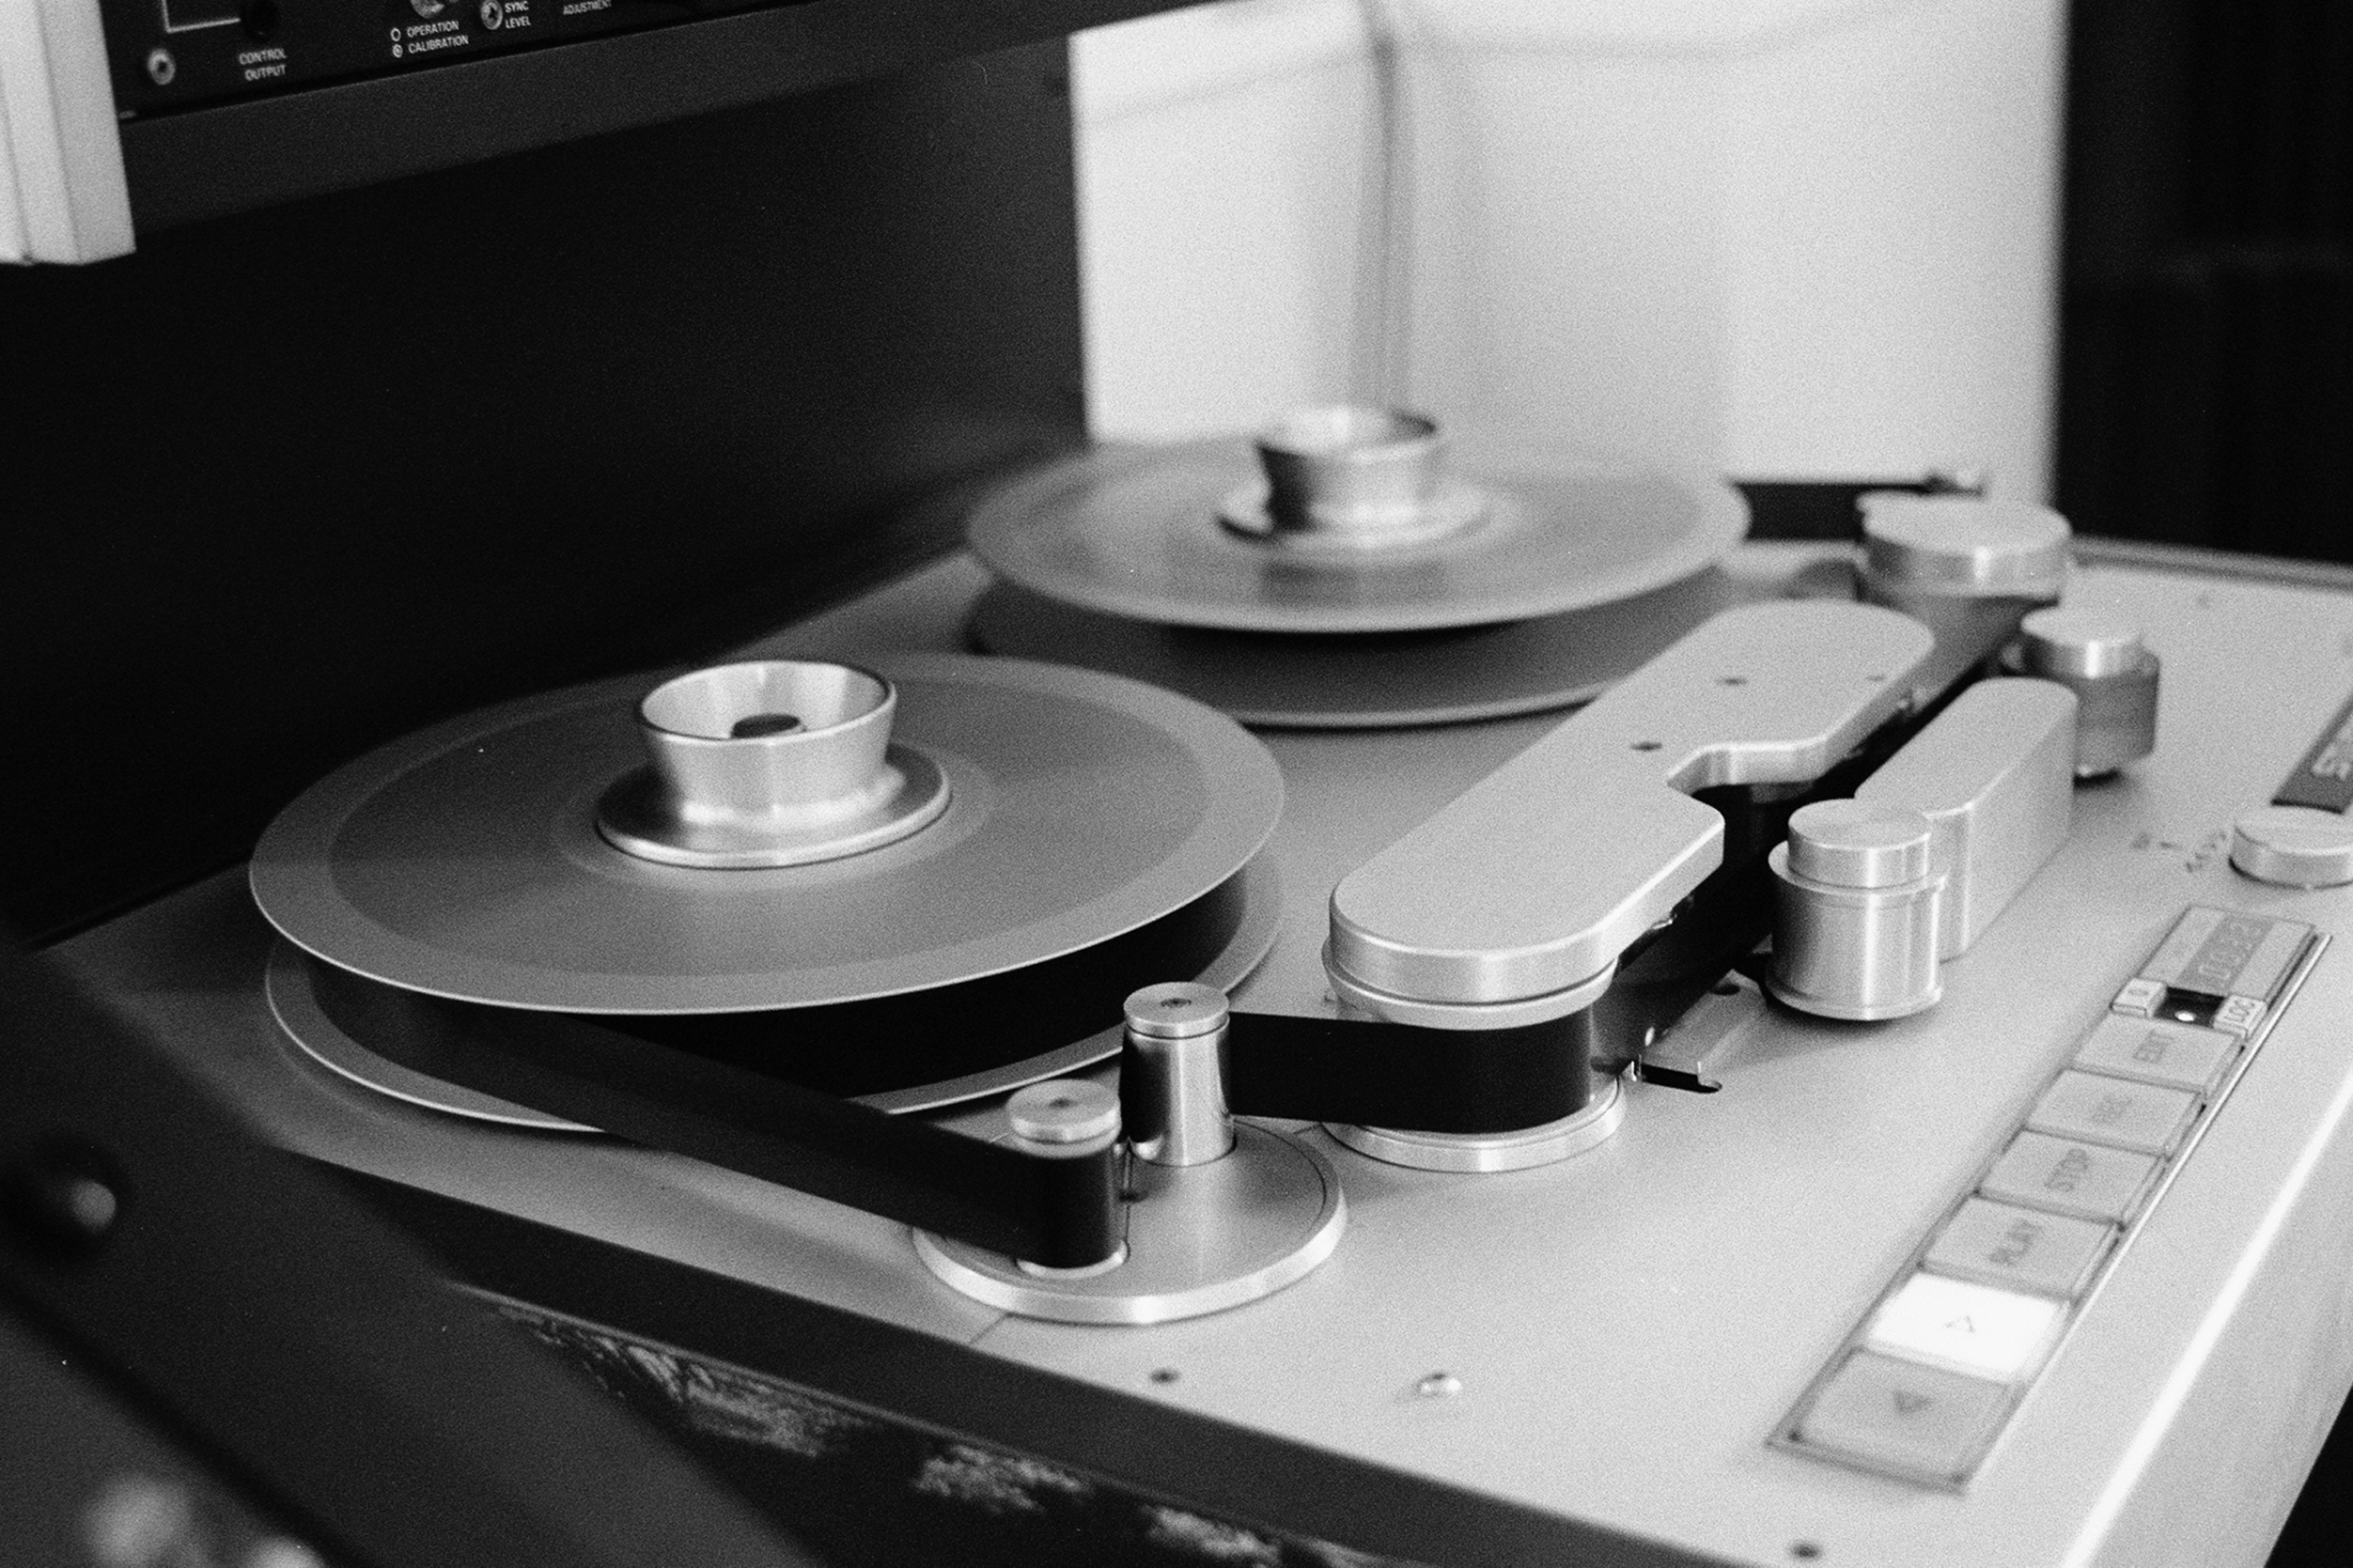 How to Maximize Analog Tape’s Limitations & Embrace Music’s Humanity